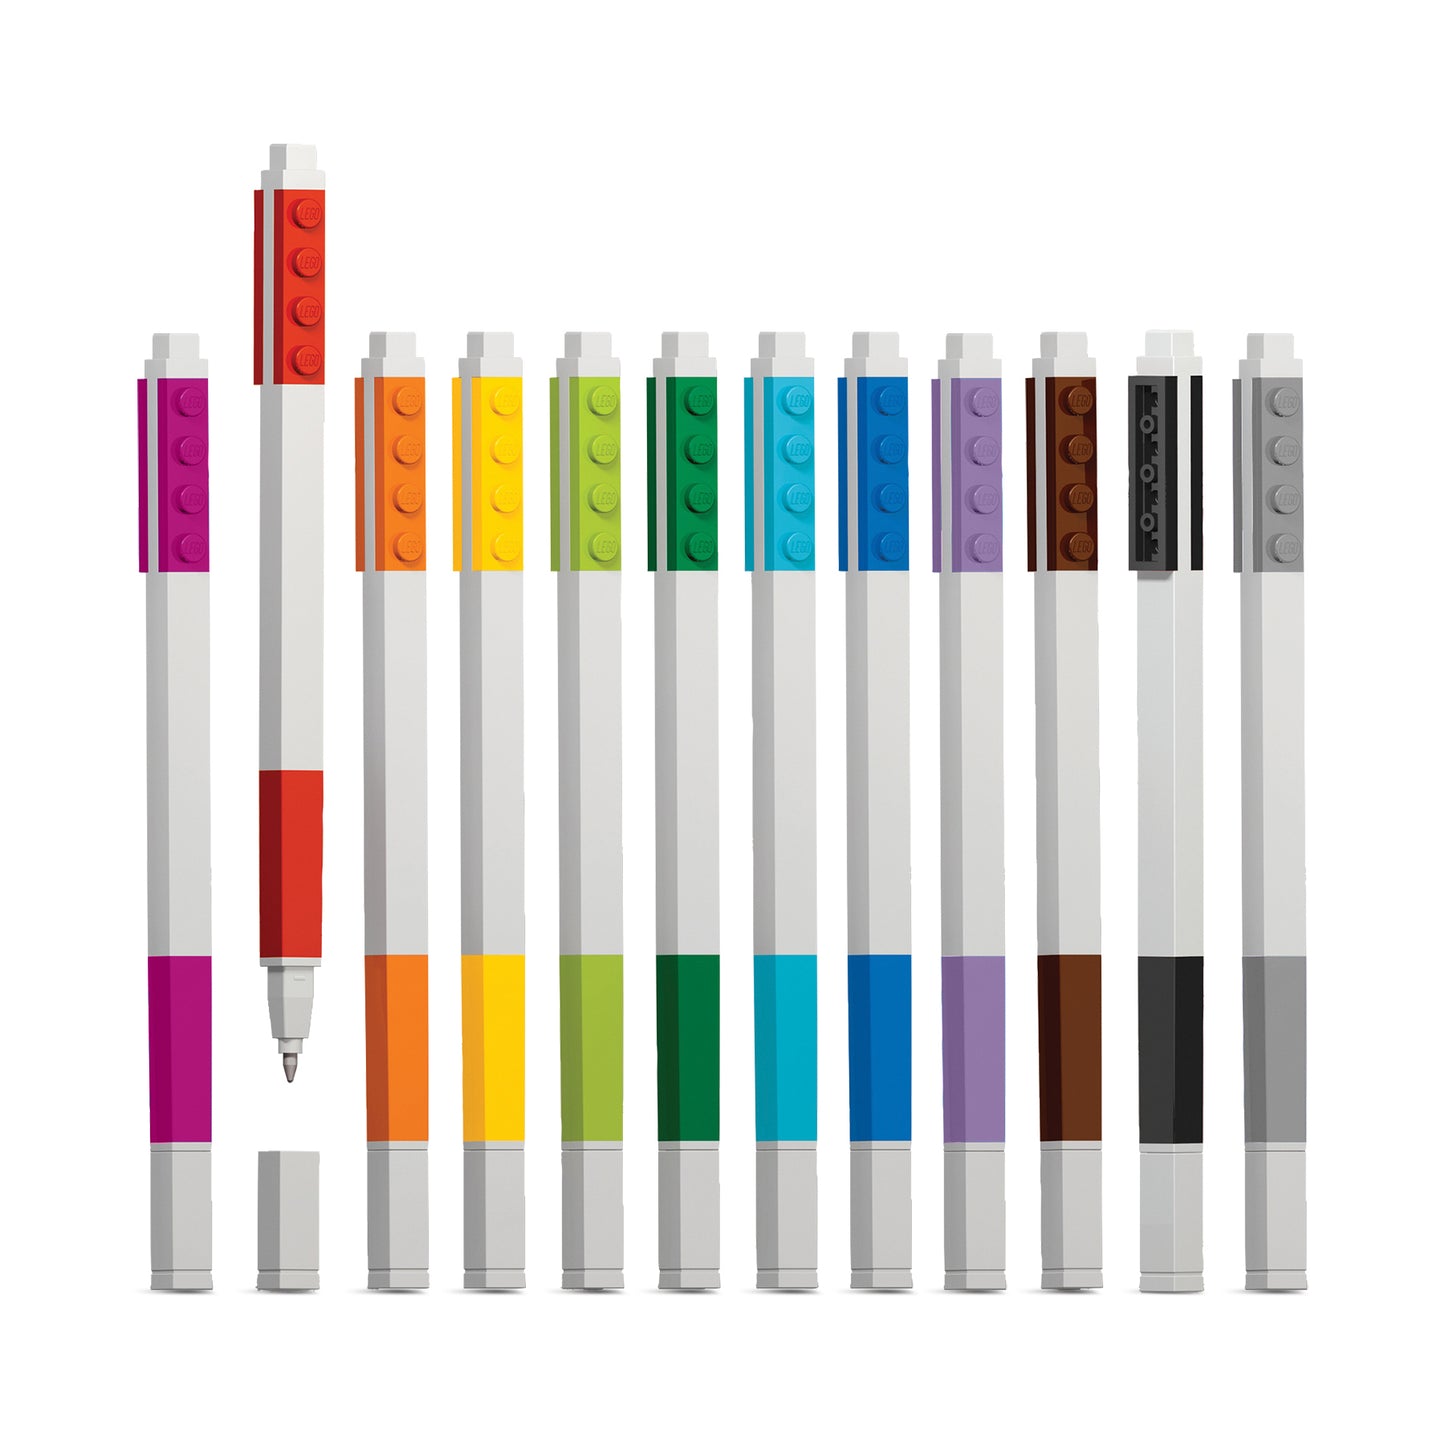 IQ LEGO® 2.0 Stationery 12 Pack Colored Gel Pens with 1x4 Building Bricks (51639)